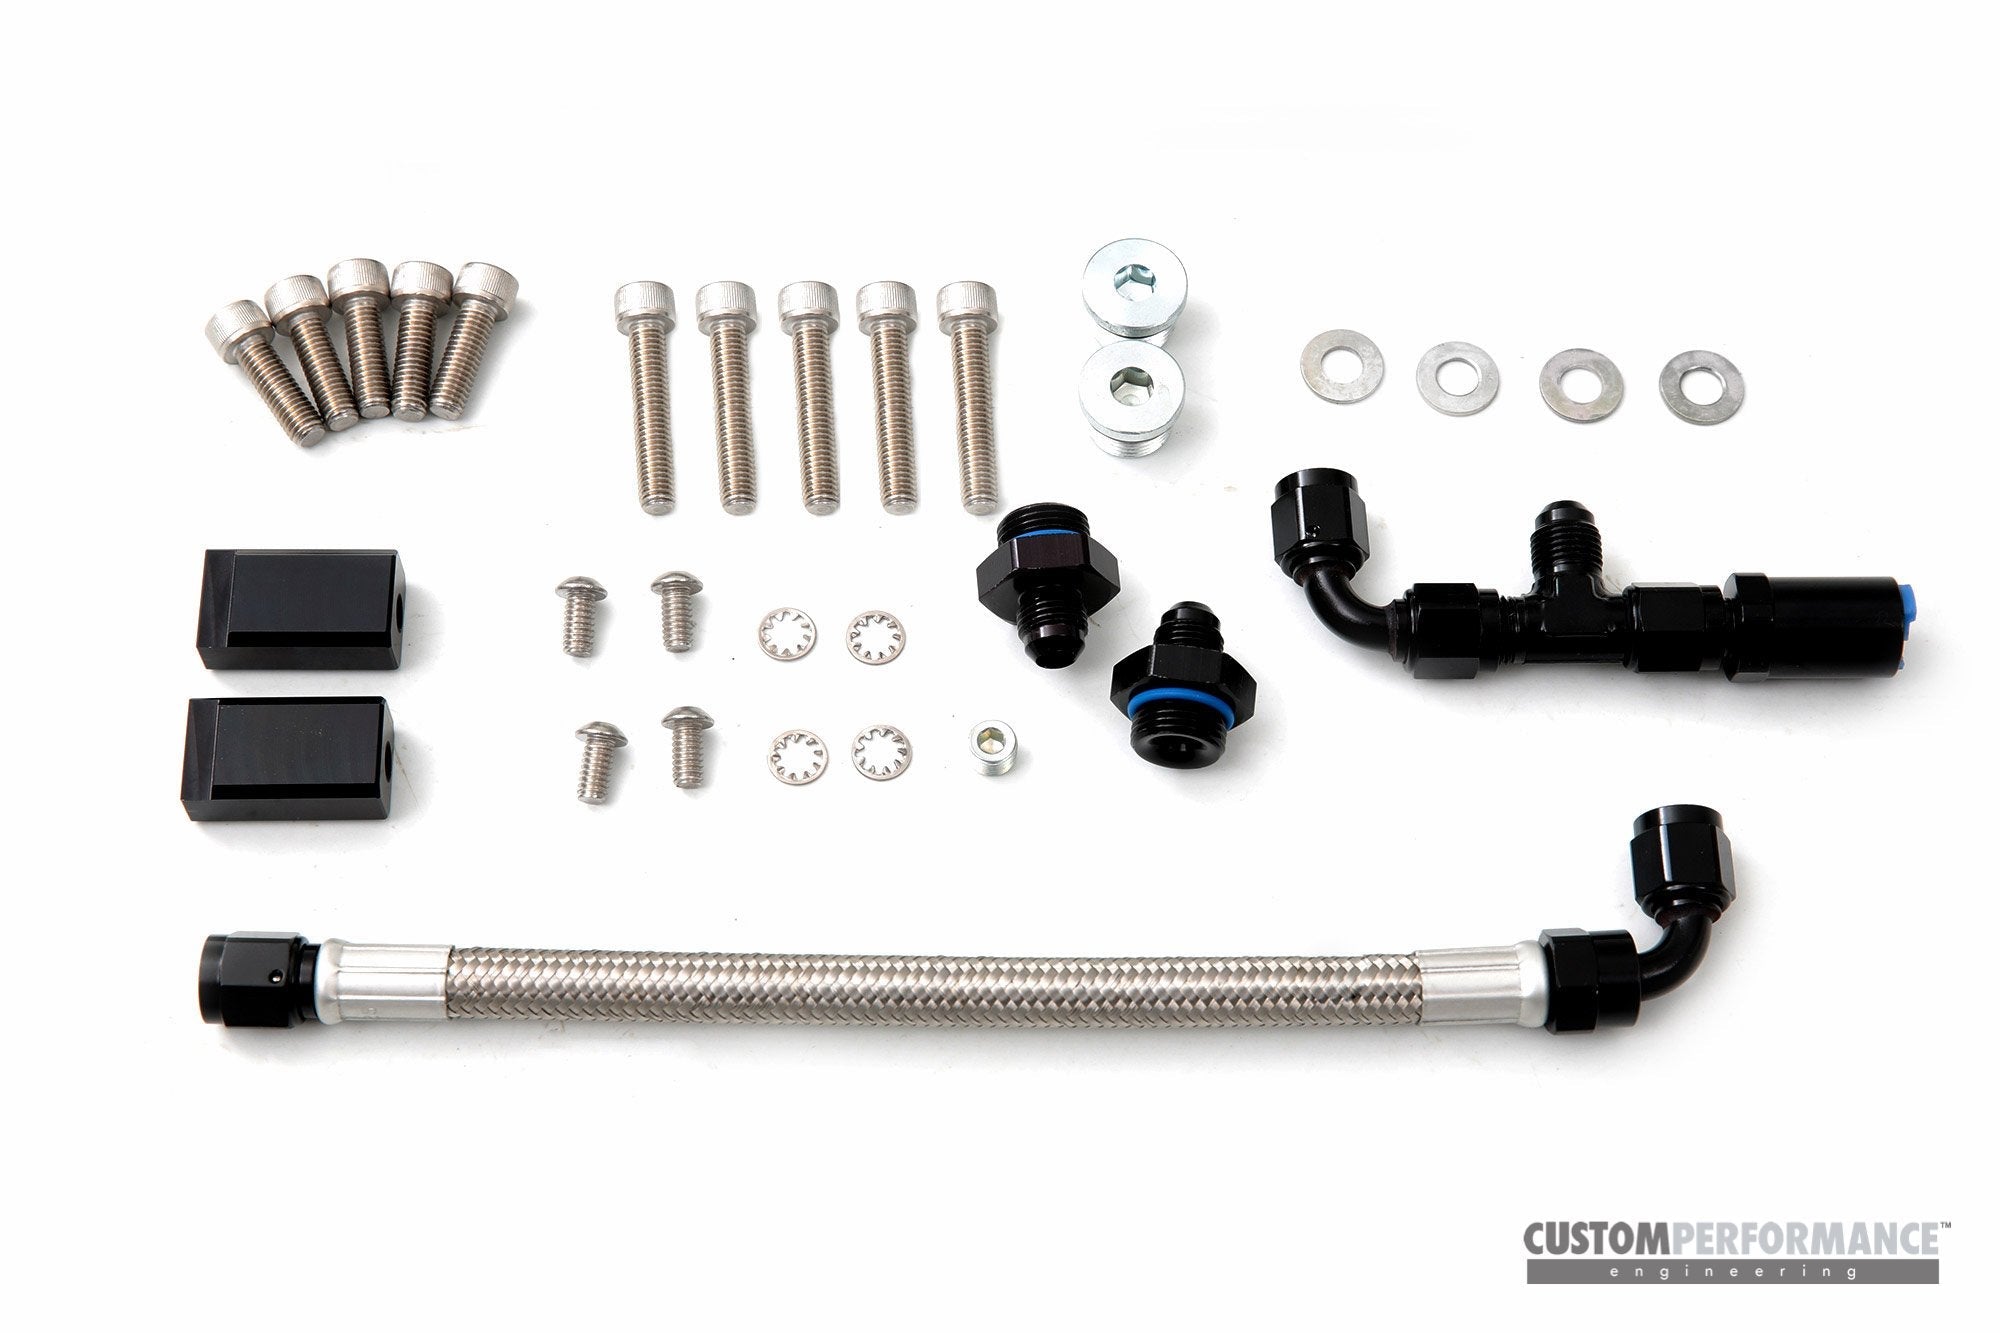 cp-E FuelBAR EcoBoost Aux Fuel Rail - Porta carburante Focus ST, Focus RS, Mustang EcoBoost, Ford Mondeo